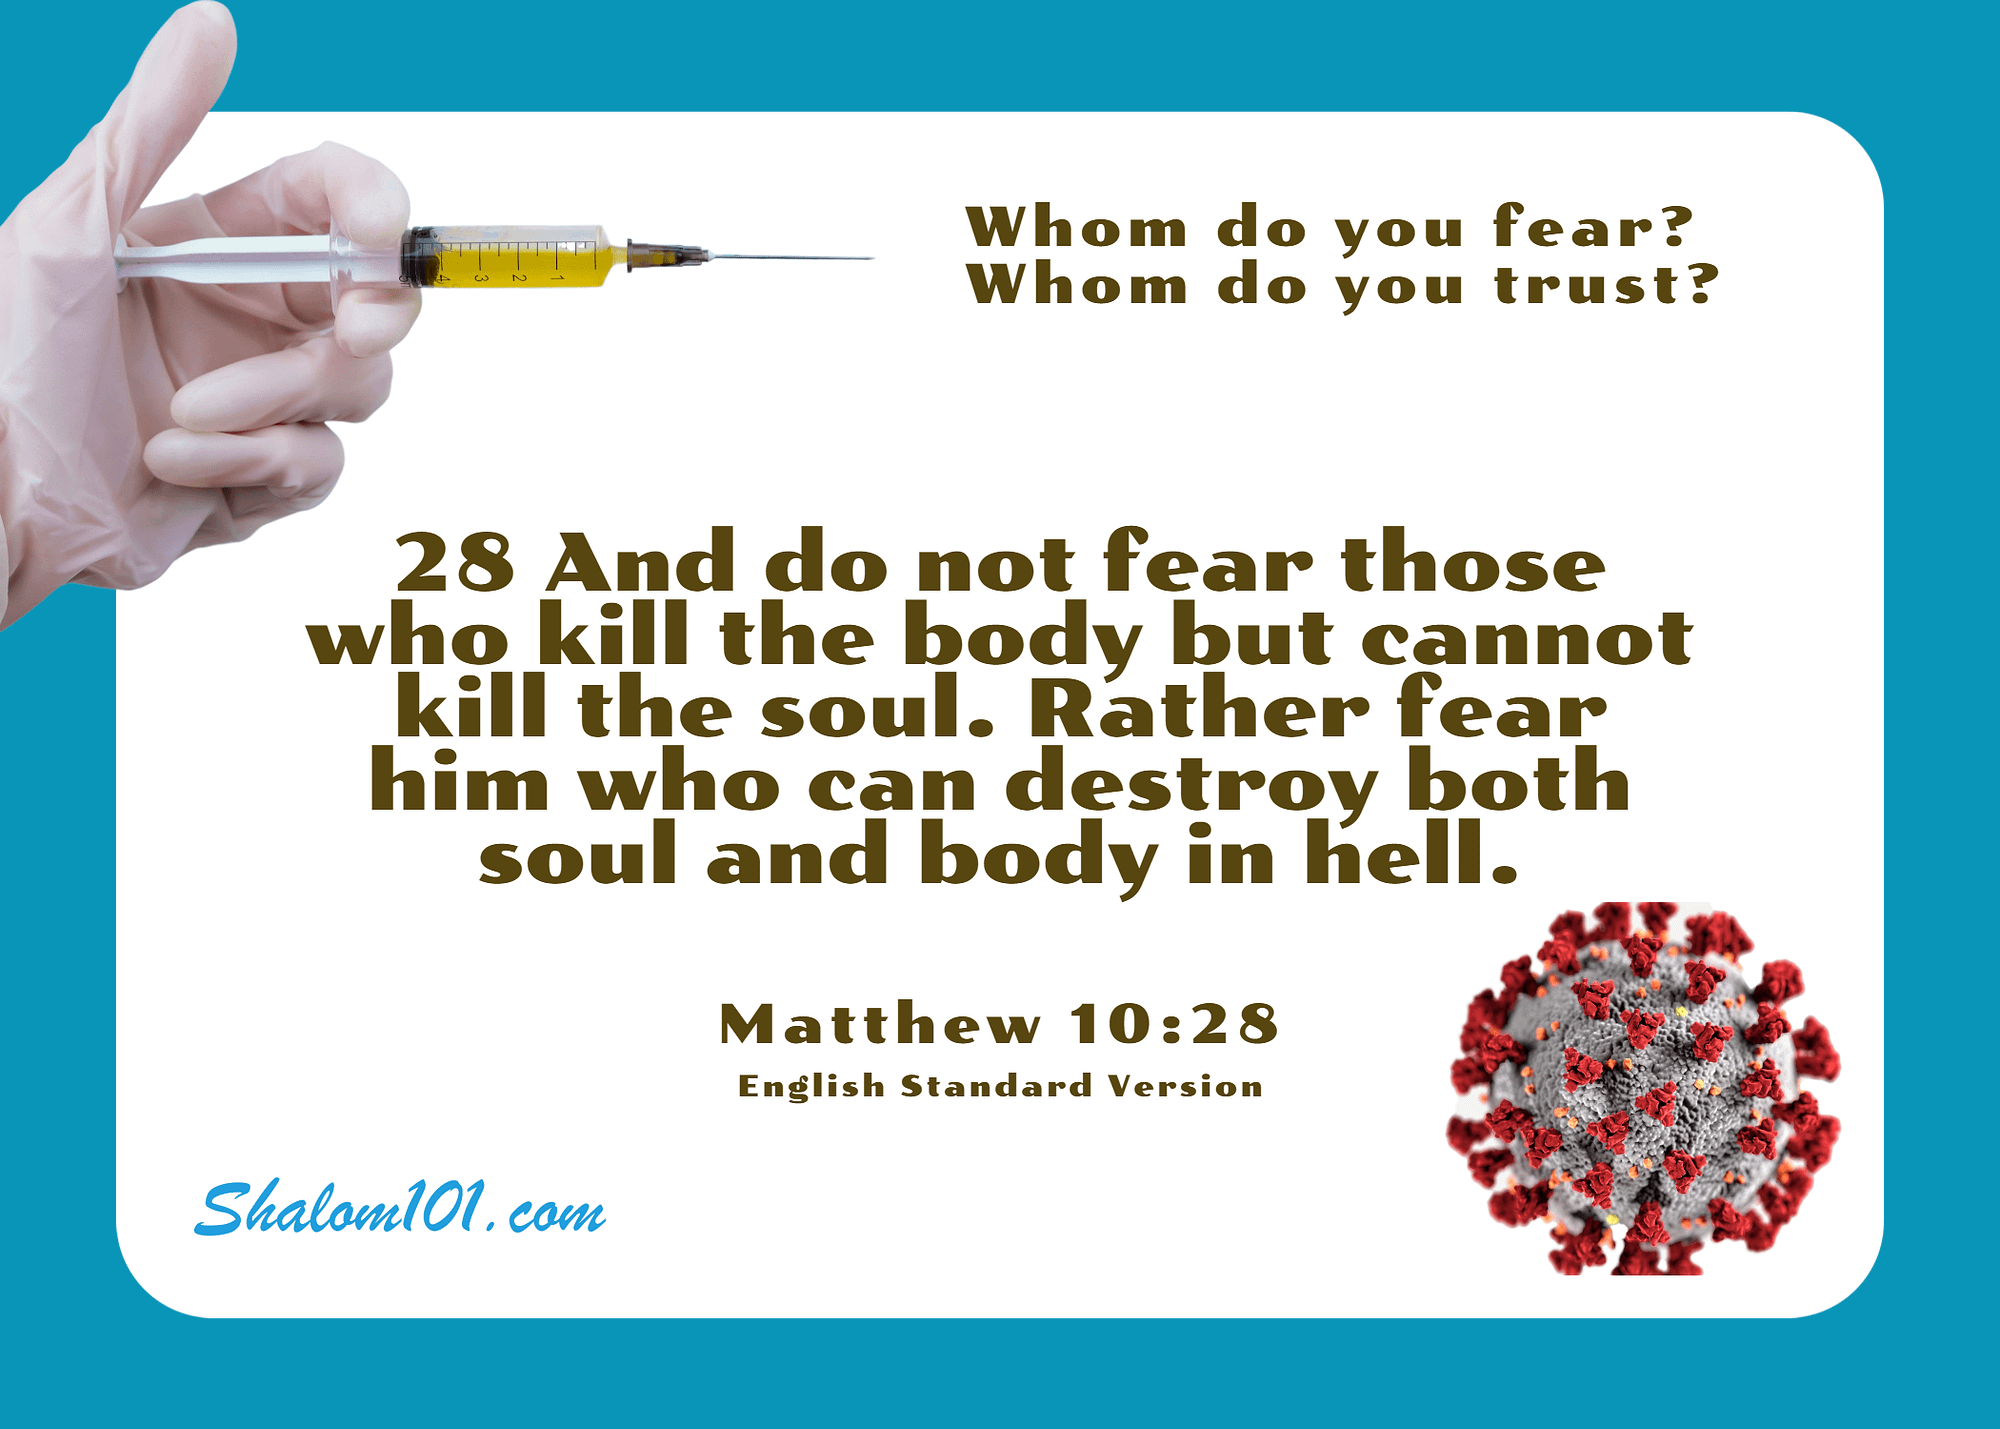 And do not fear those who kill the body but cannot kill the soul. Rather fear him who can destroy both soul and body in hell.[